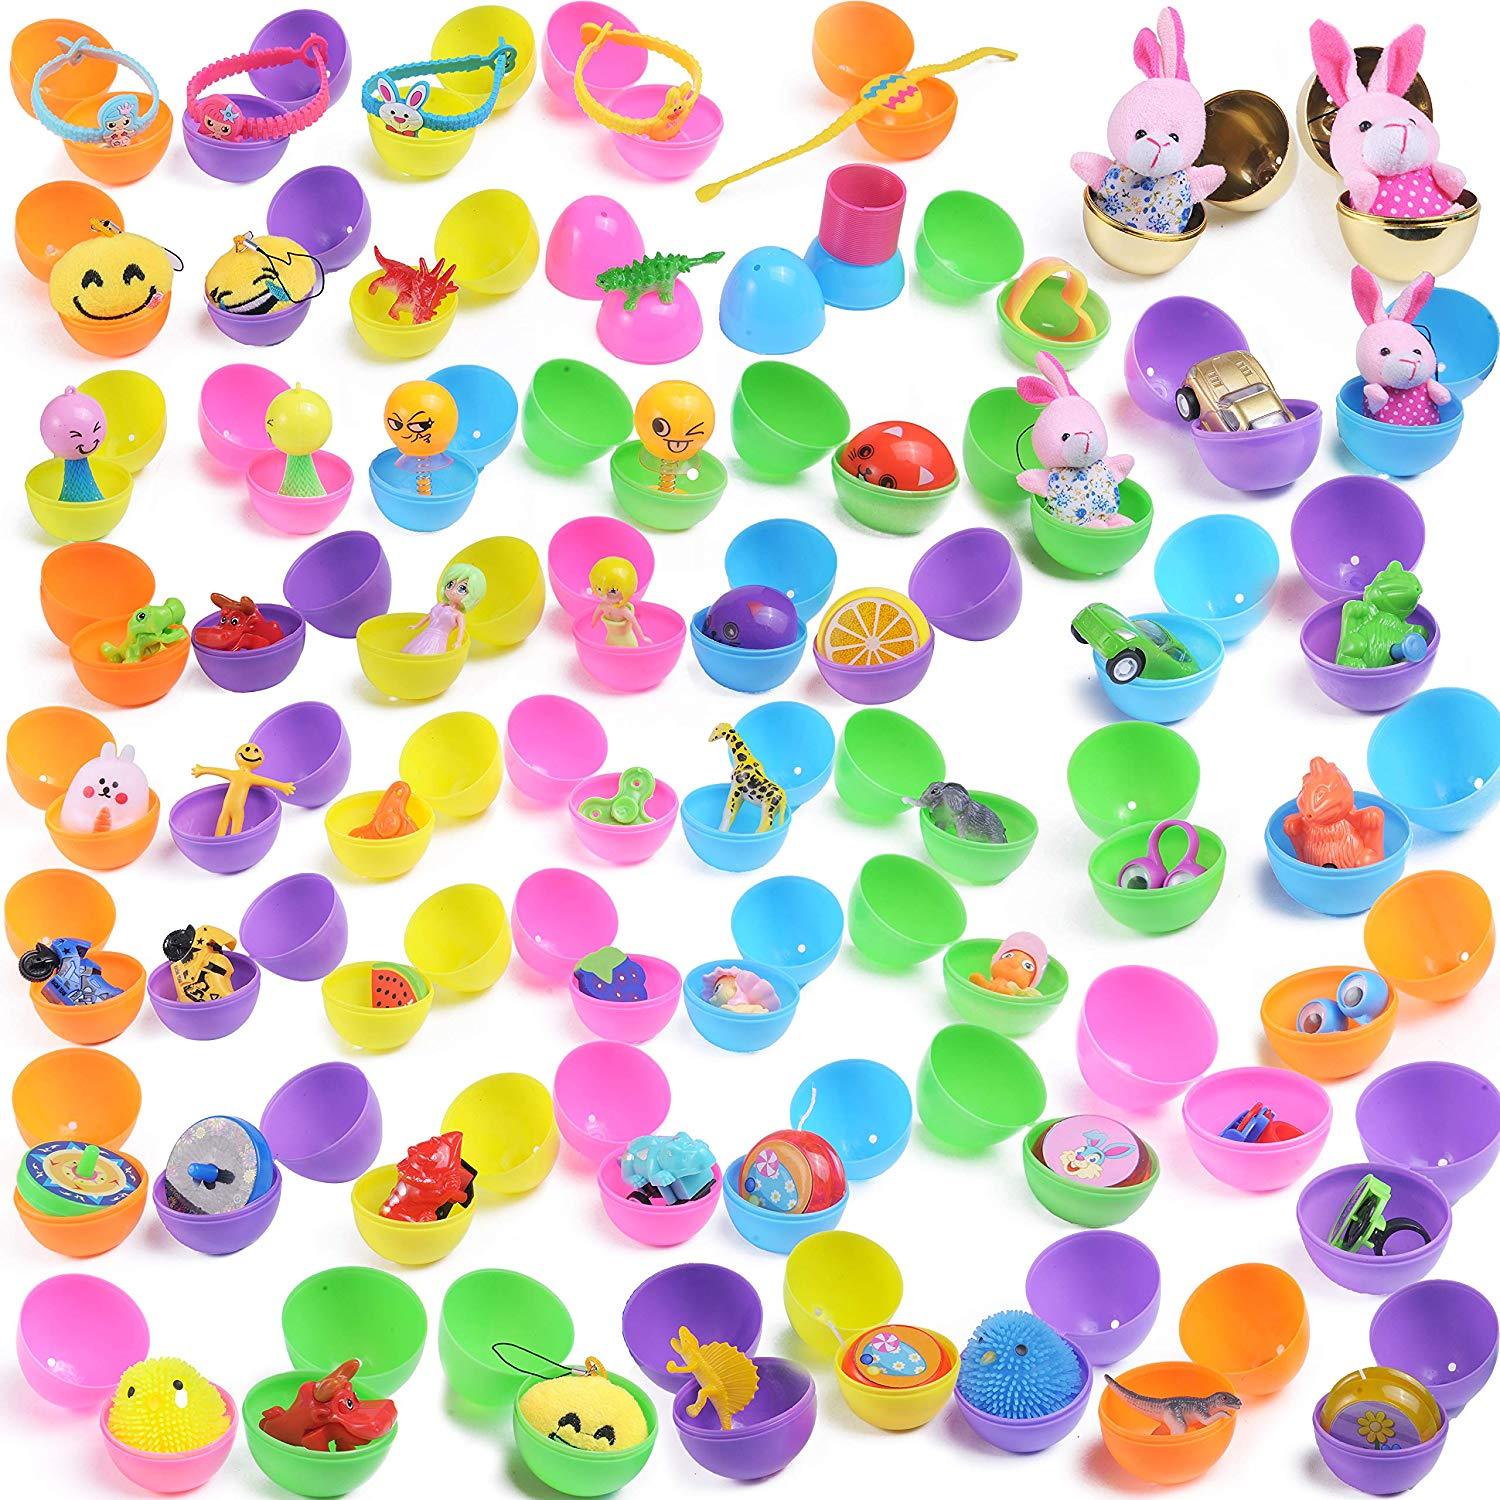 60 Pre Filled Easter Eggs With Novelty Toys